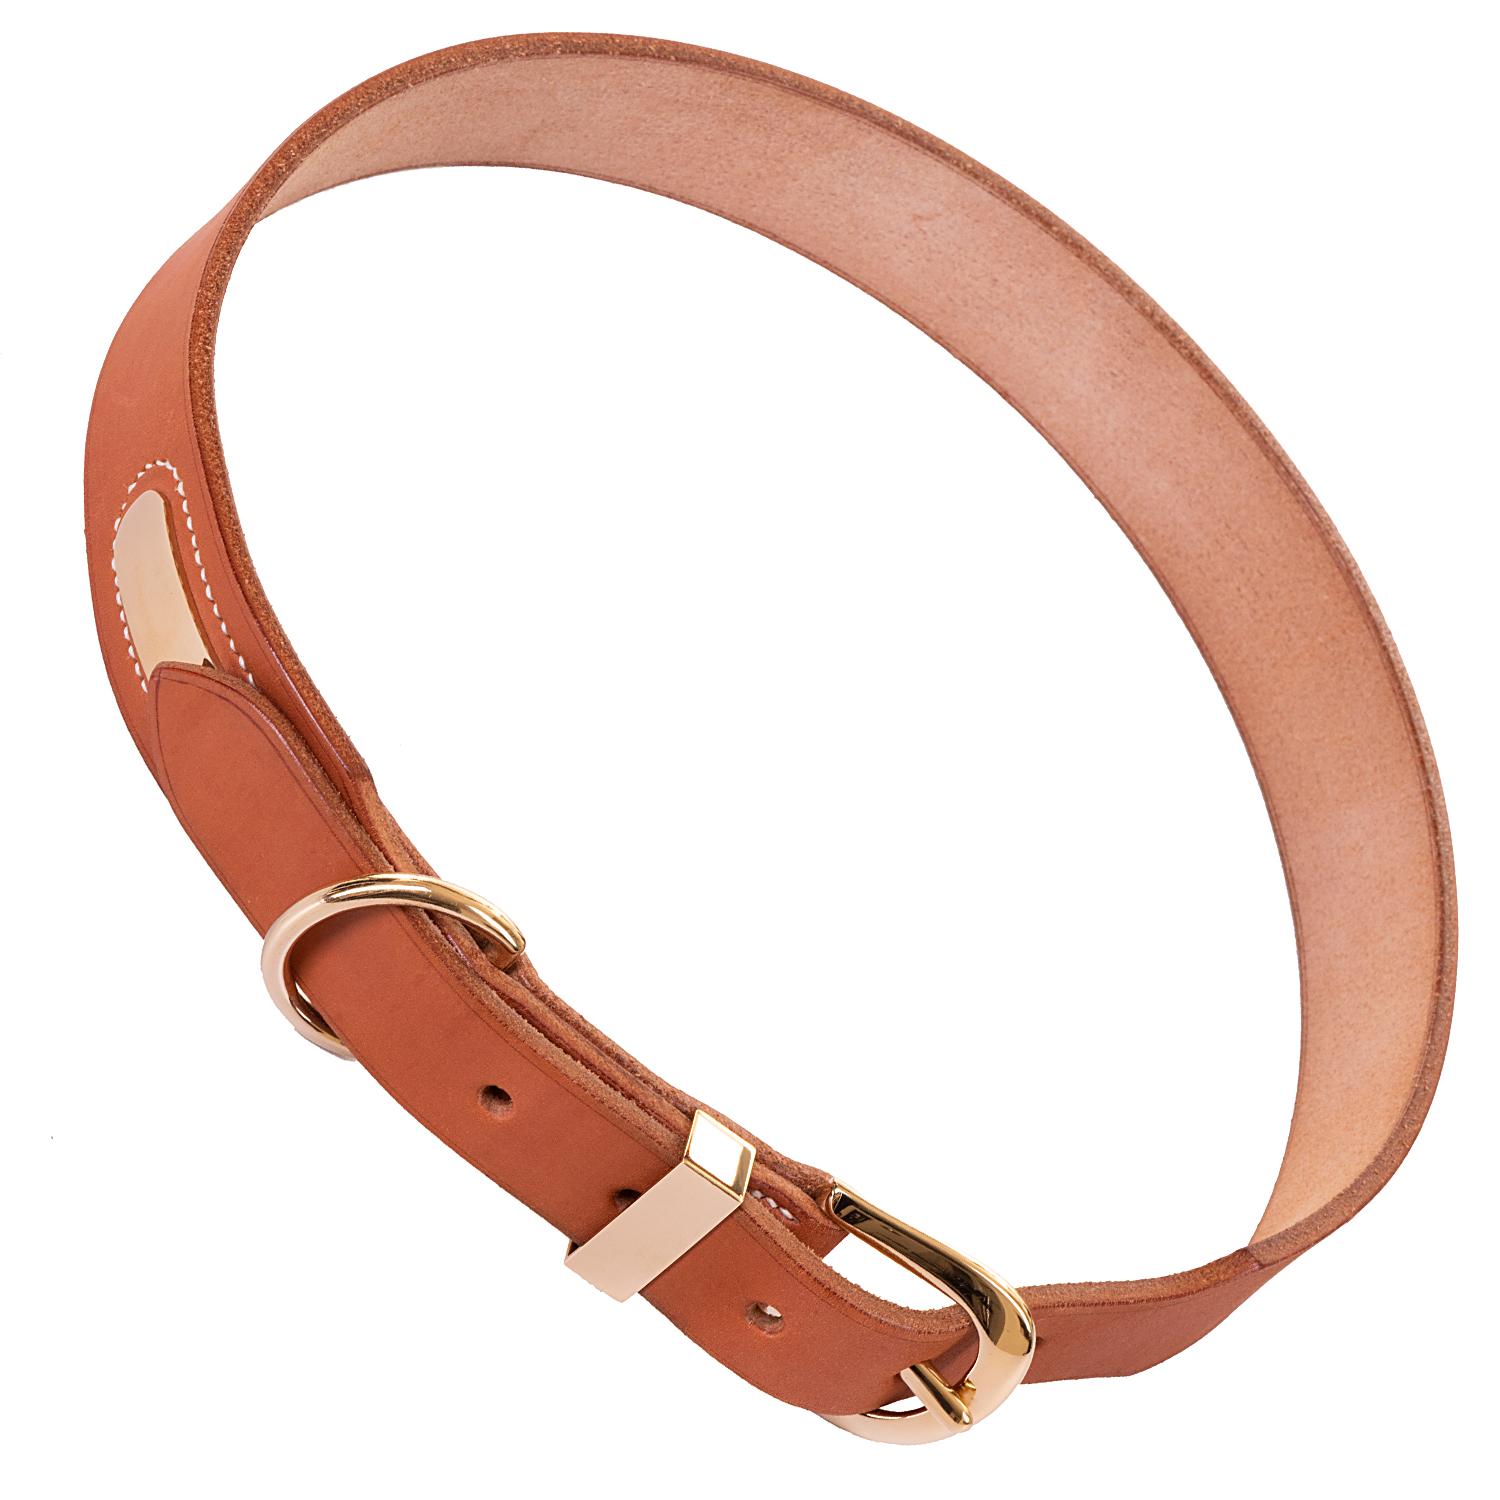 This Beautiful Hermes Belt is finished in Hermes Classic 'Vache Naturelle', a natural cowhide that Hermes leave smooth and untreated, which develops its own patina over time. Measuring 70cm ( fit 26in to 29in waist), the belt is beautifully accented